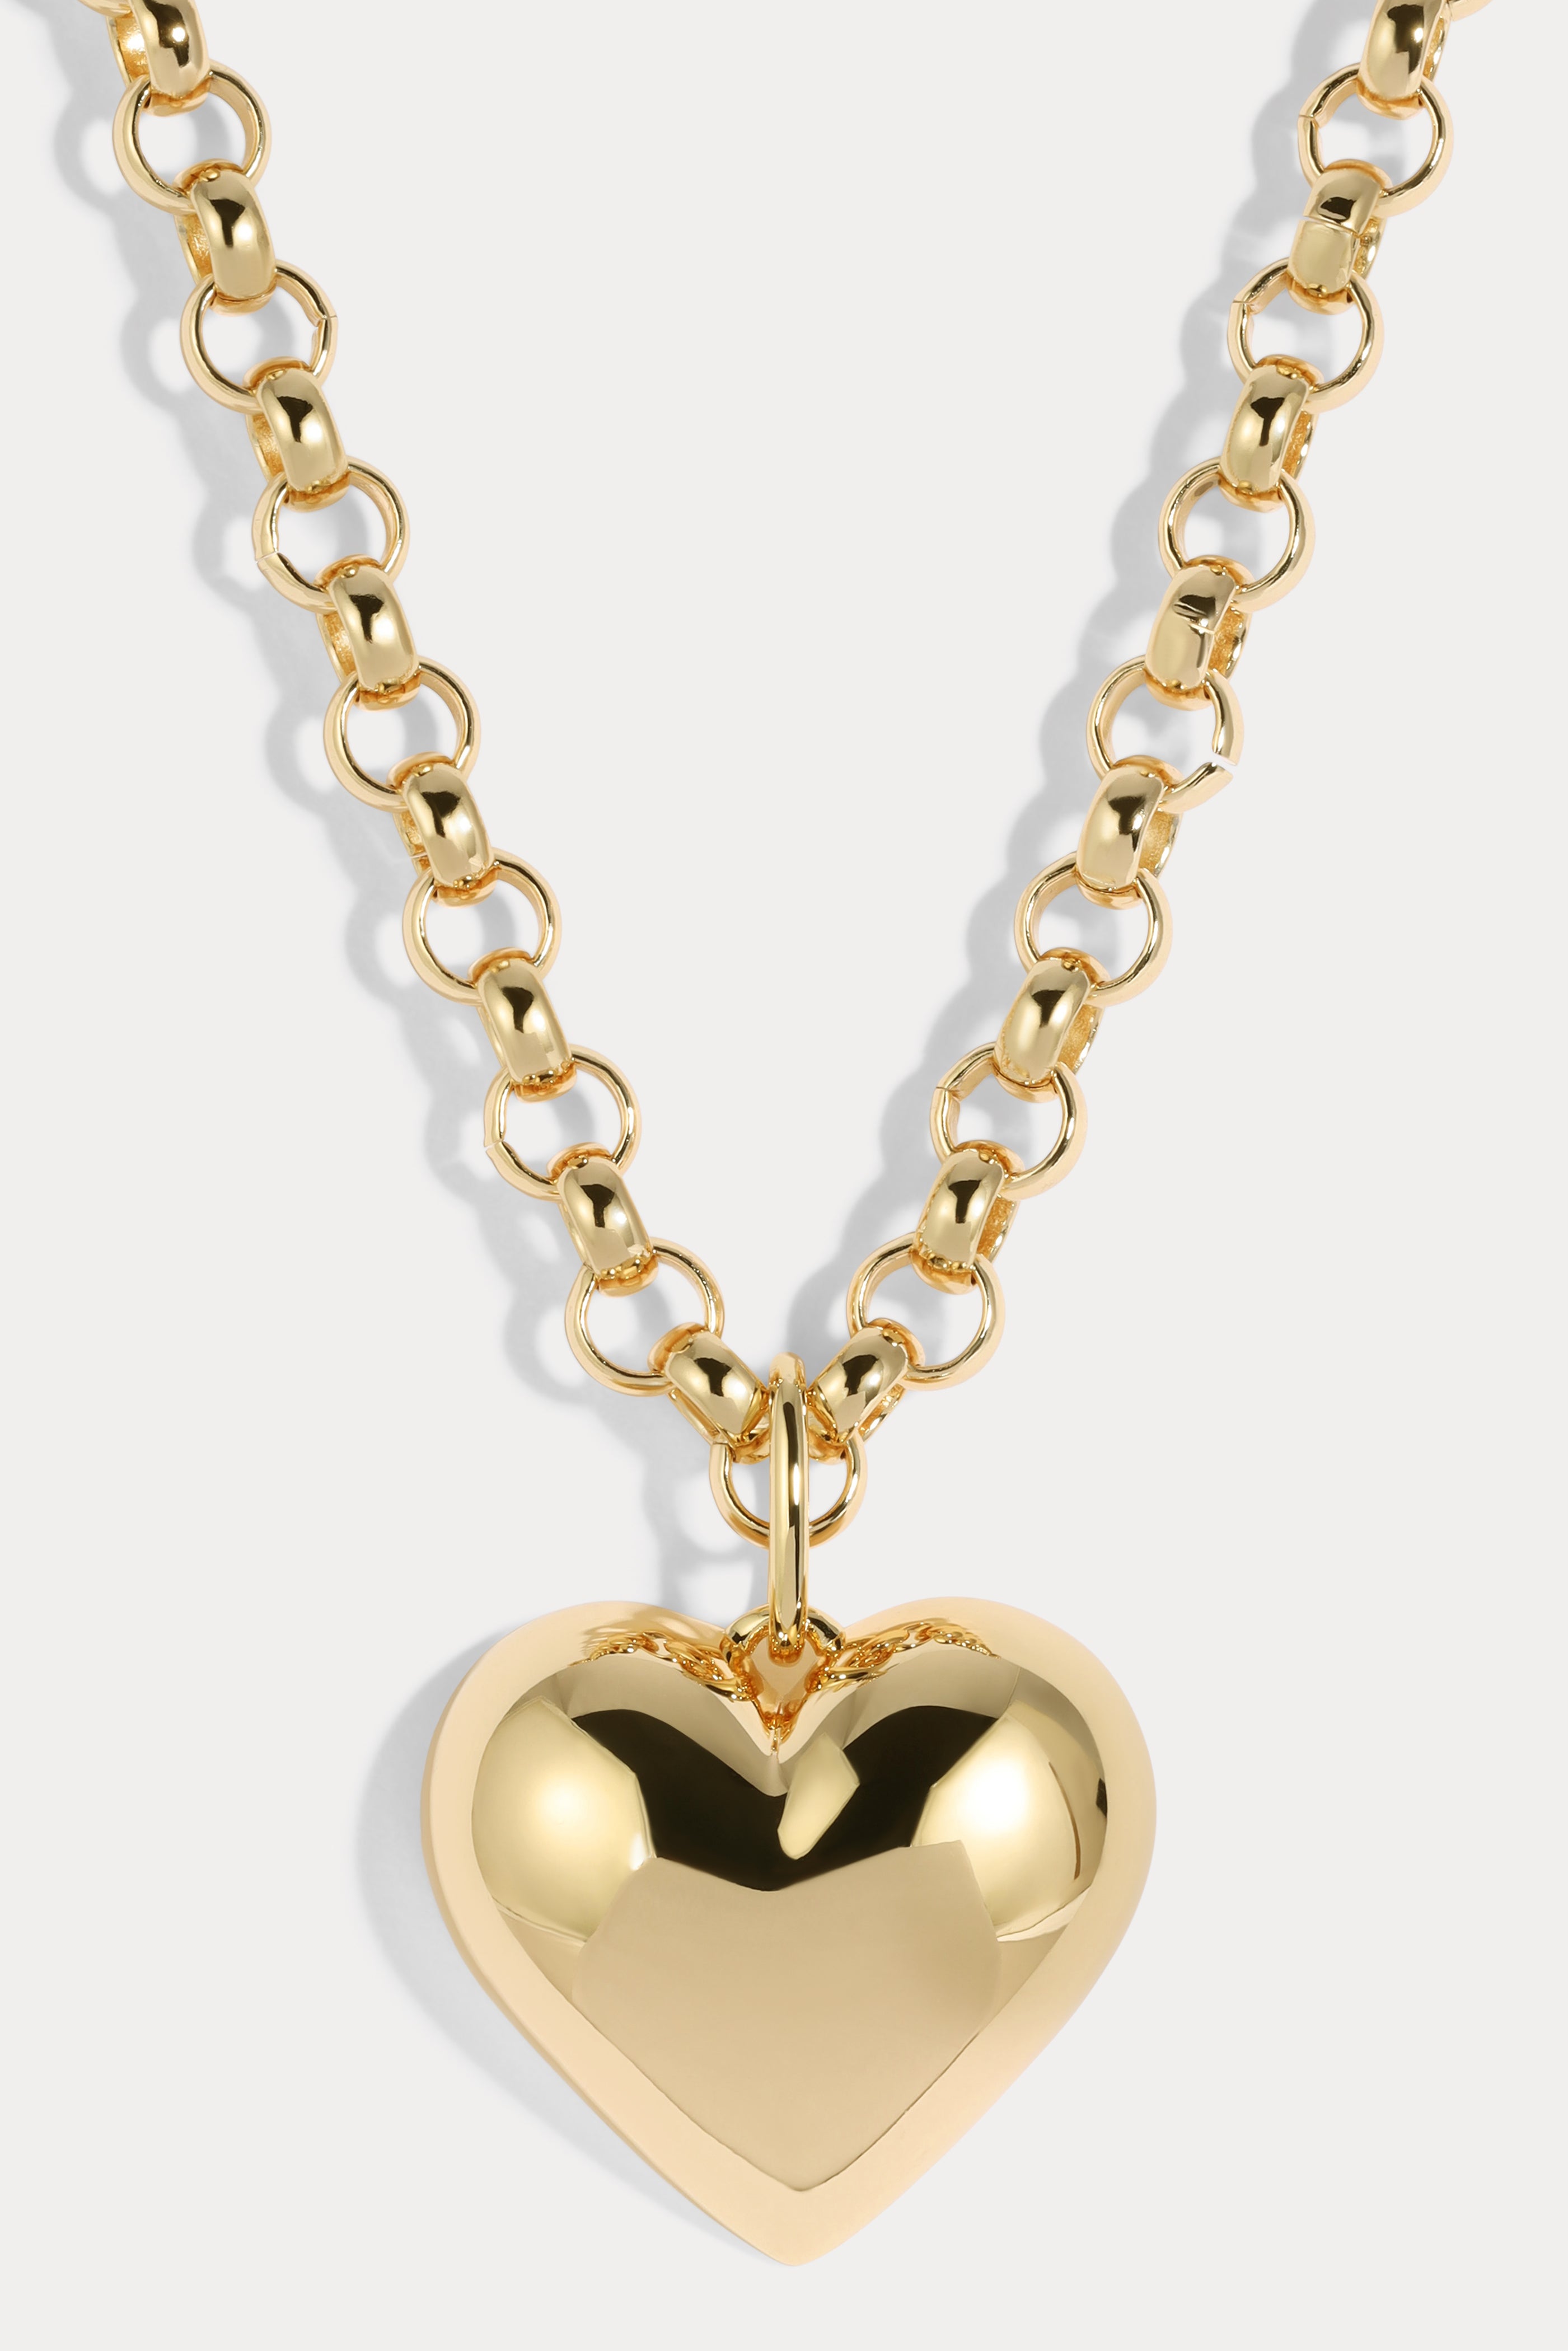 Personalized Half Heart Fingerprint Necklace Memorial Keepsake Stainless  Steel Engraved Actual Thumb Print Jewelry Engraving with Gift Box [Gold] -  Walmart.com